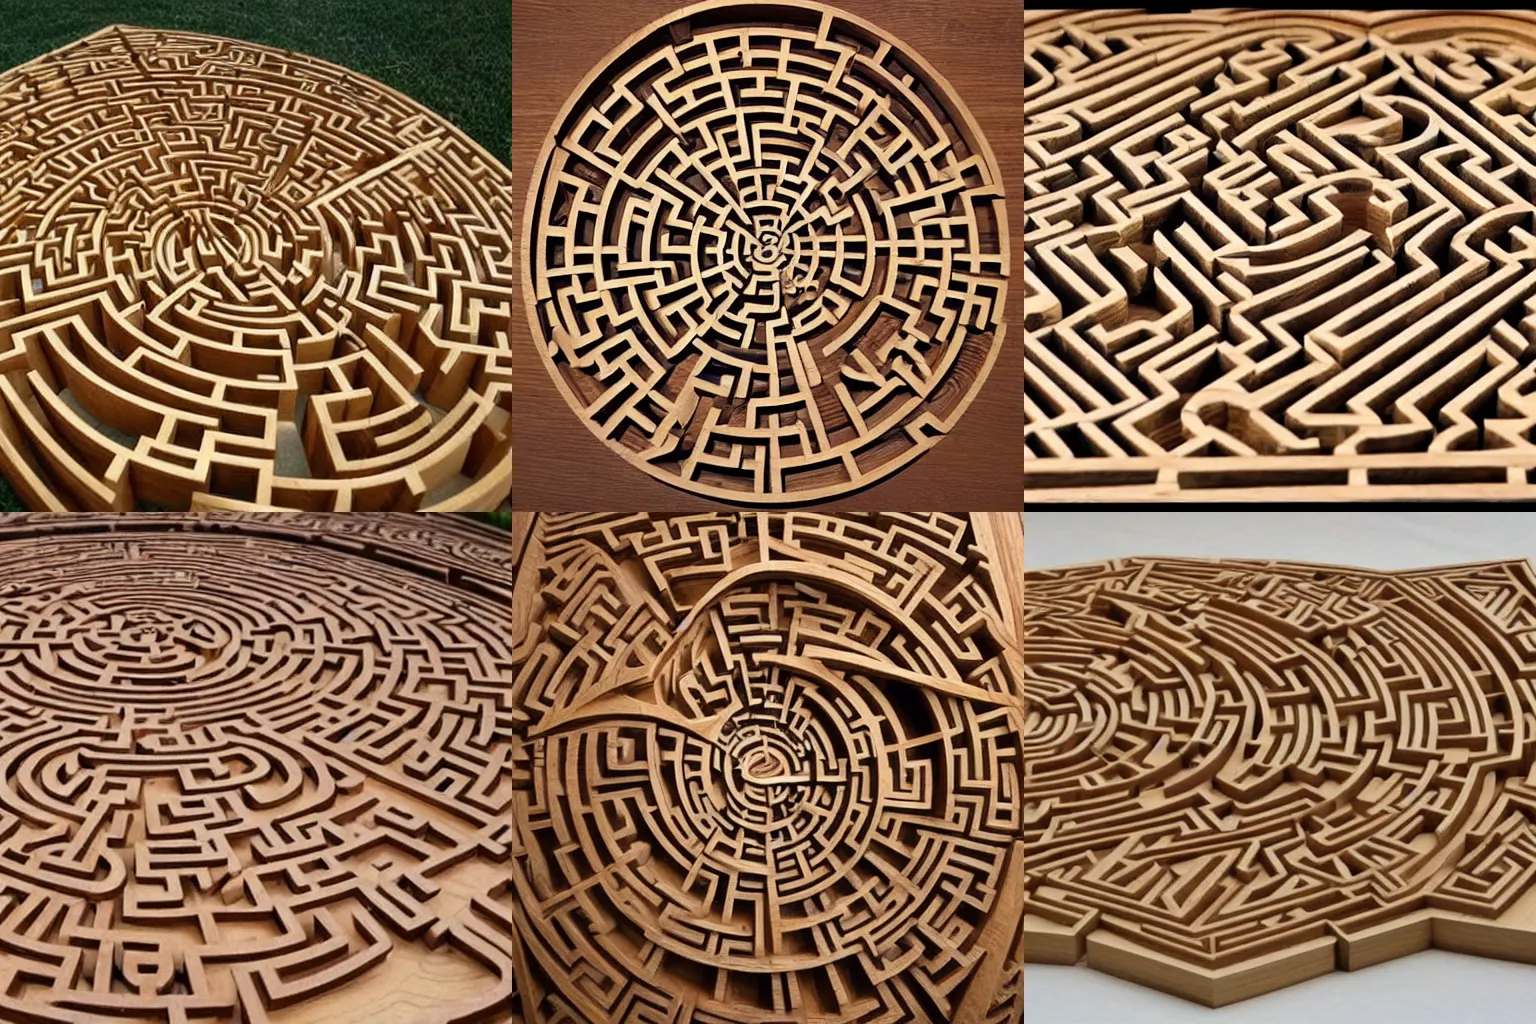 Prompt: The World's most intricate maze, carved out of wood